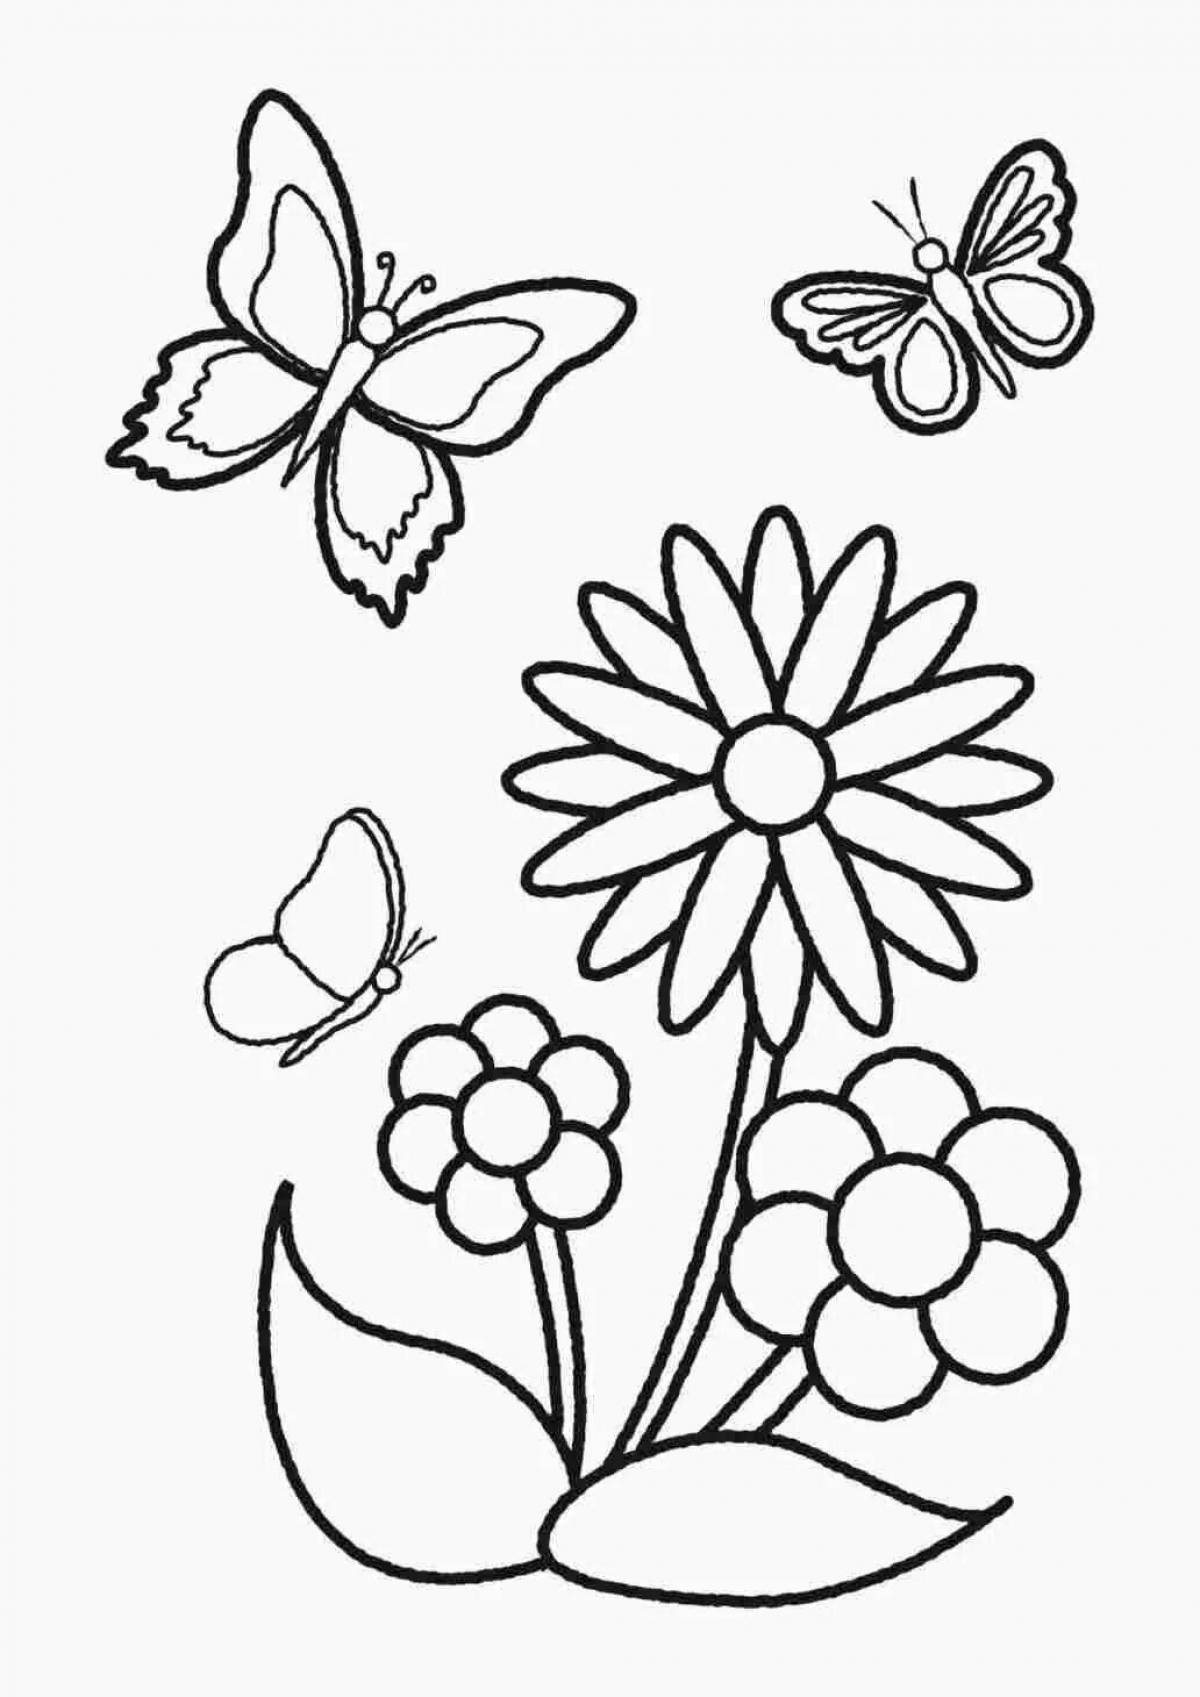 Playful flower coloring book for 5-6 year olds